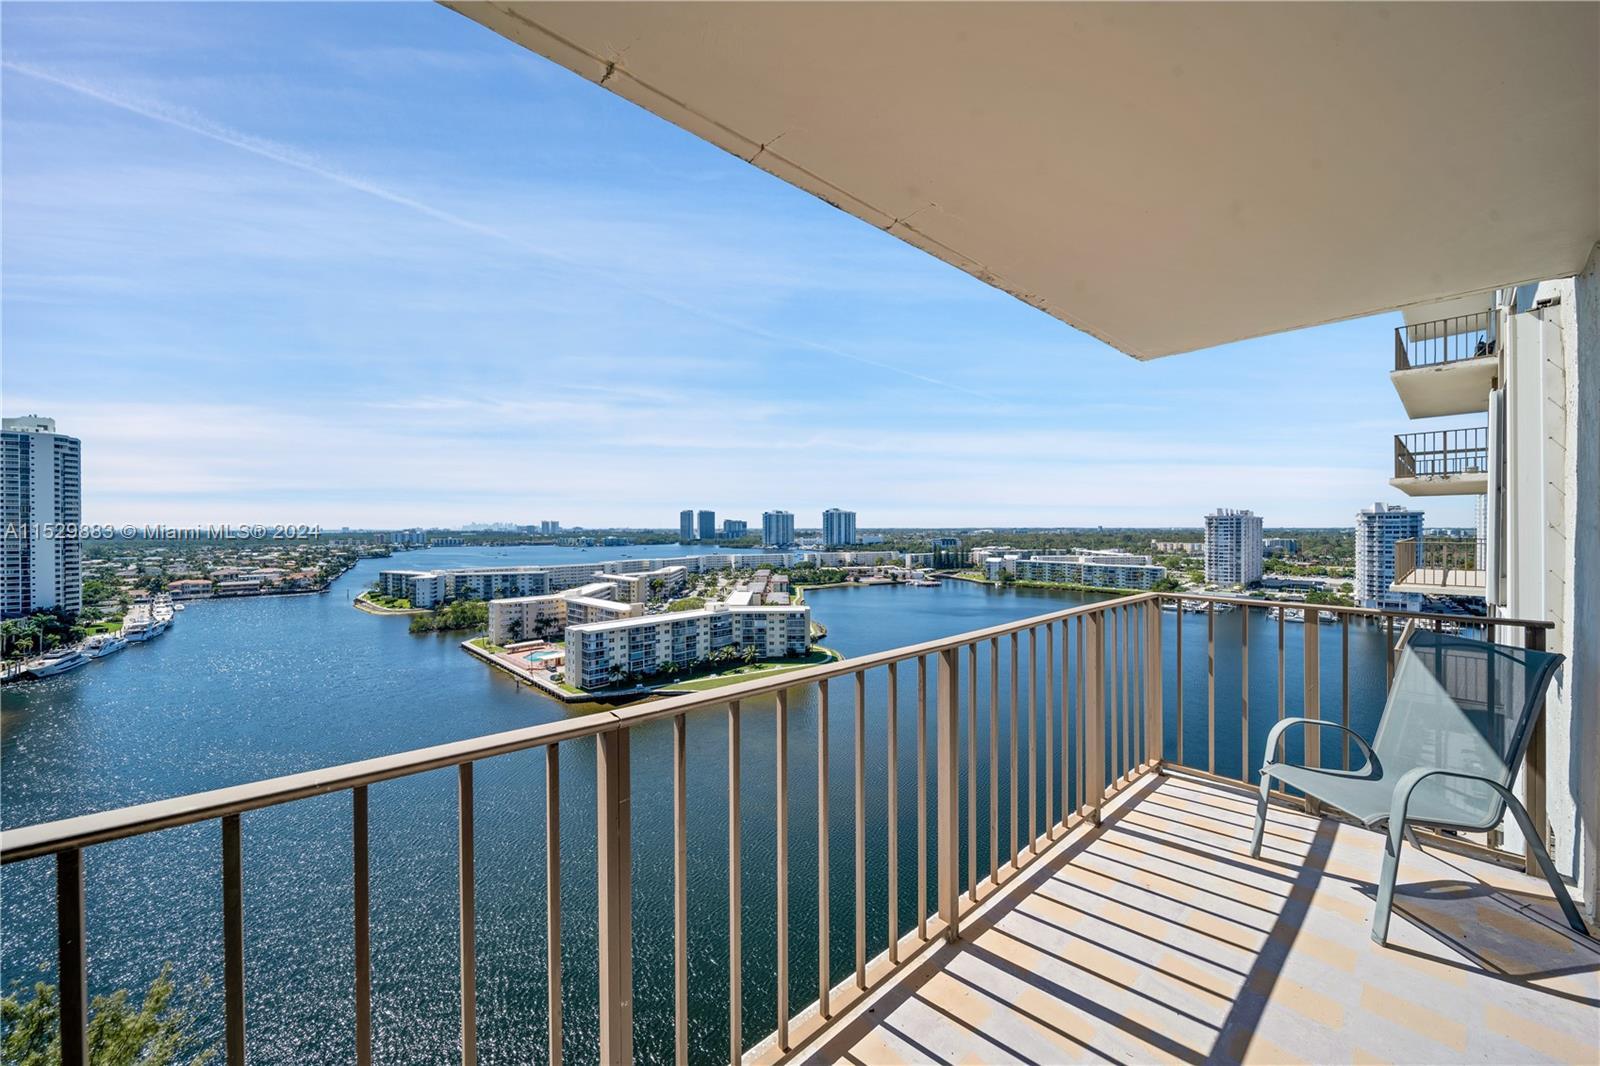 This Clipper Building unit has a panoramic southern view of the city of Miami skyline and Maule Lake